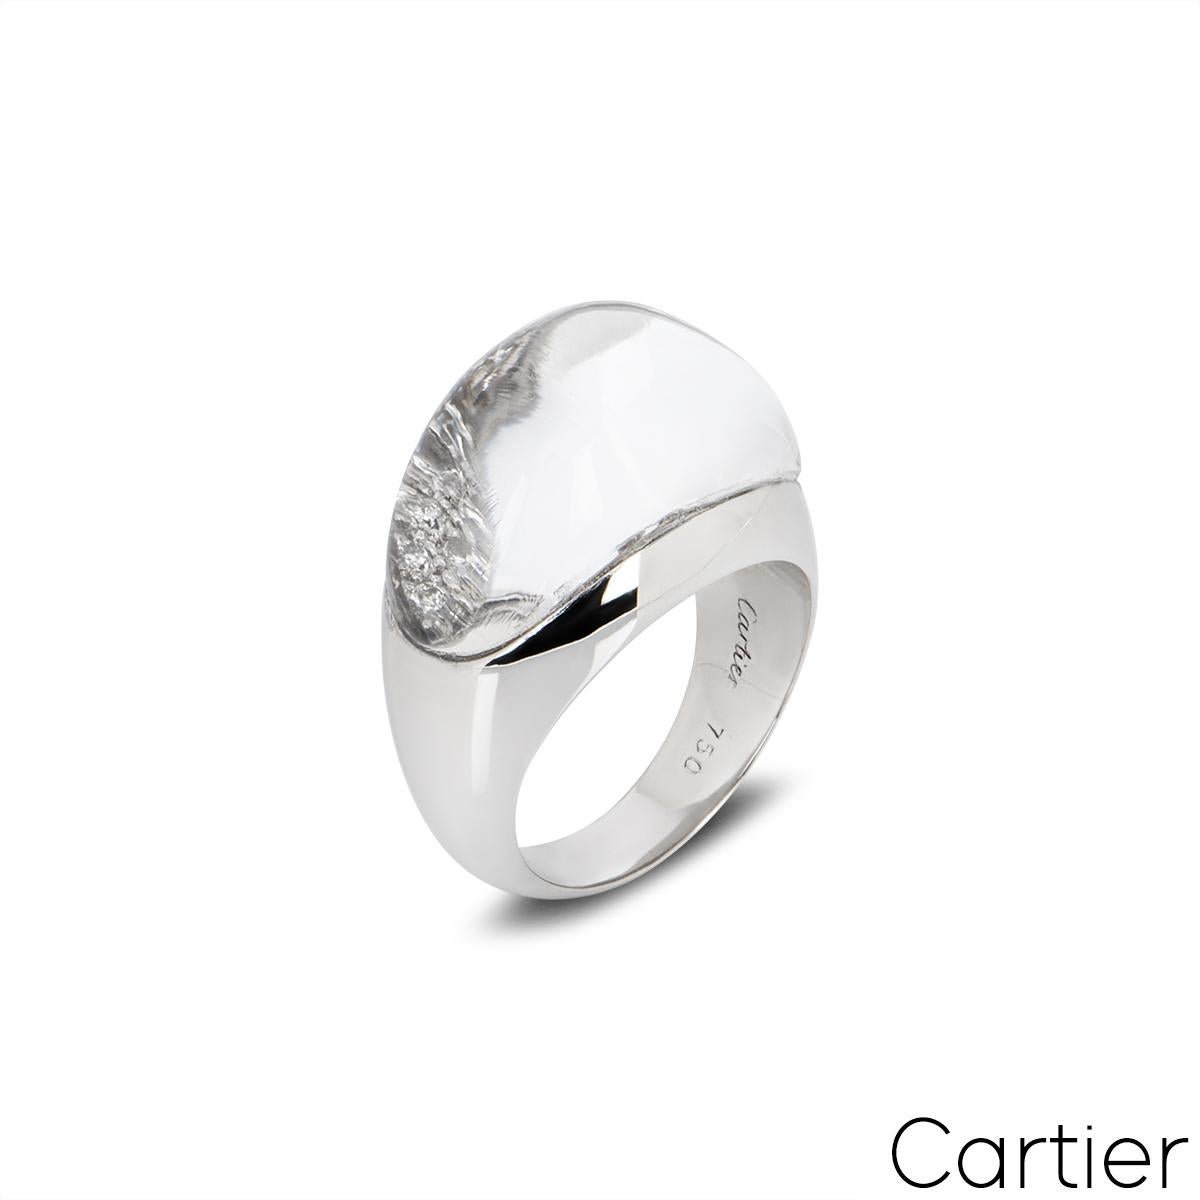 An exquisite 18k white gold diamond ring by Cartier from the Myst de Cartier collection. The ring features 25 round brilliant cut diamonds under a domed rock crystal overlay. The ring measures 14mm wide and tapers down to 4.8mm, is a UK size M and